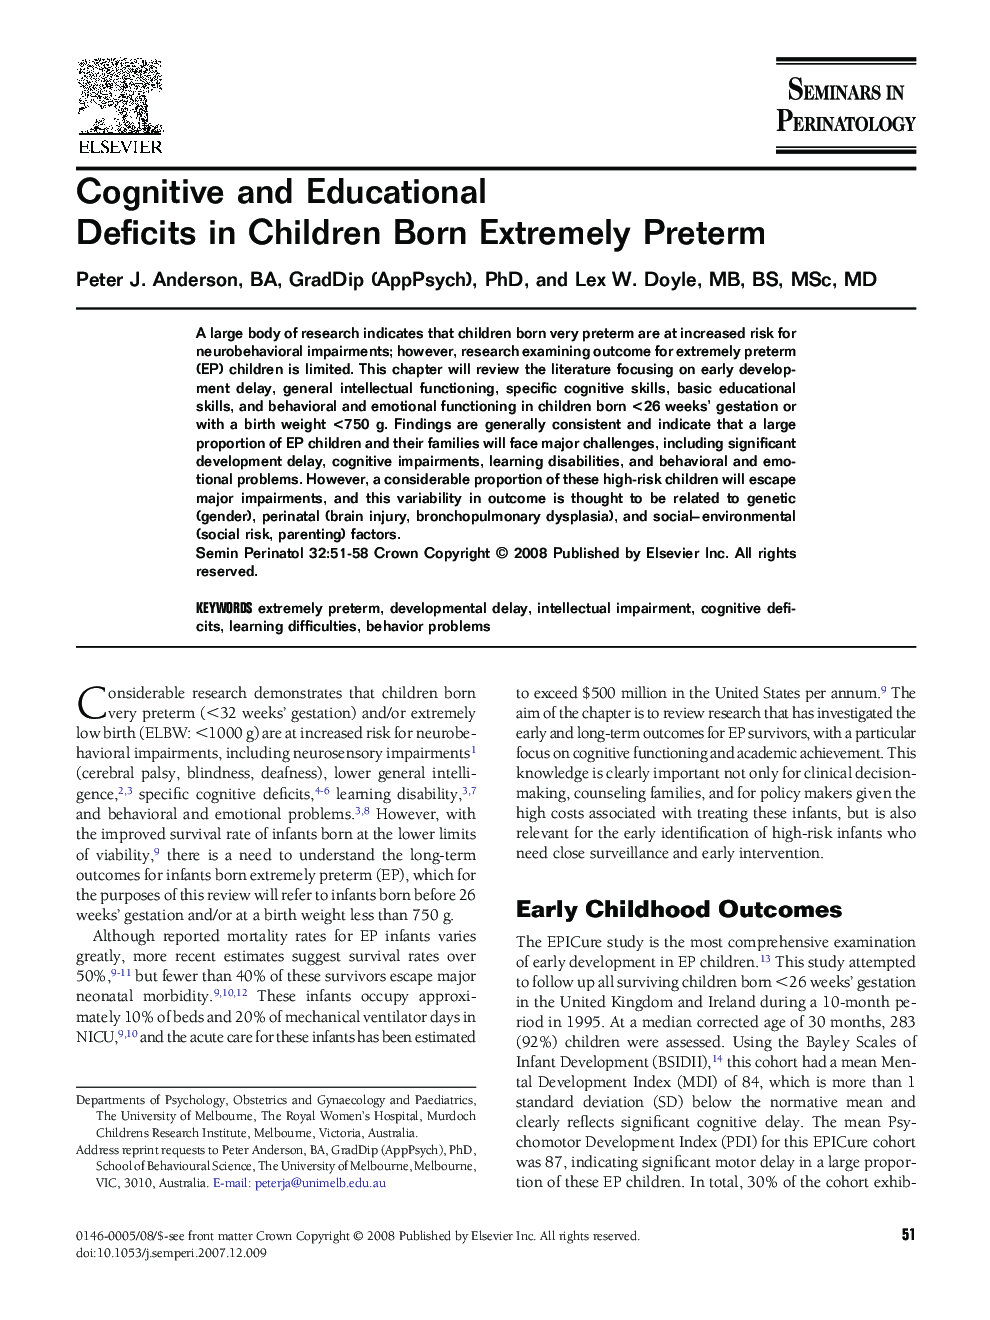 Cognitive and Educational Deficits in Children Born Extremely Preterm